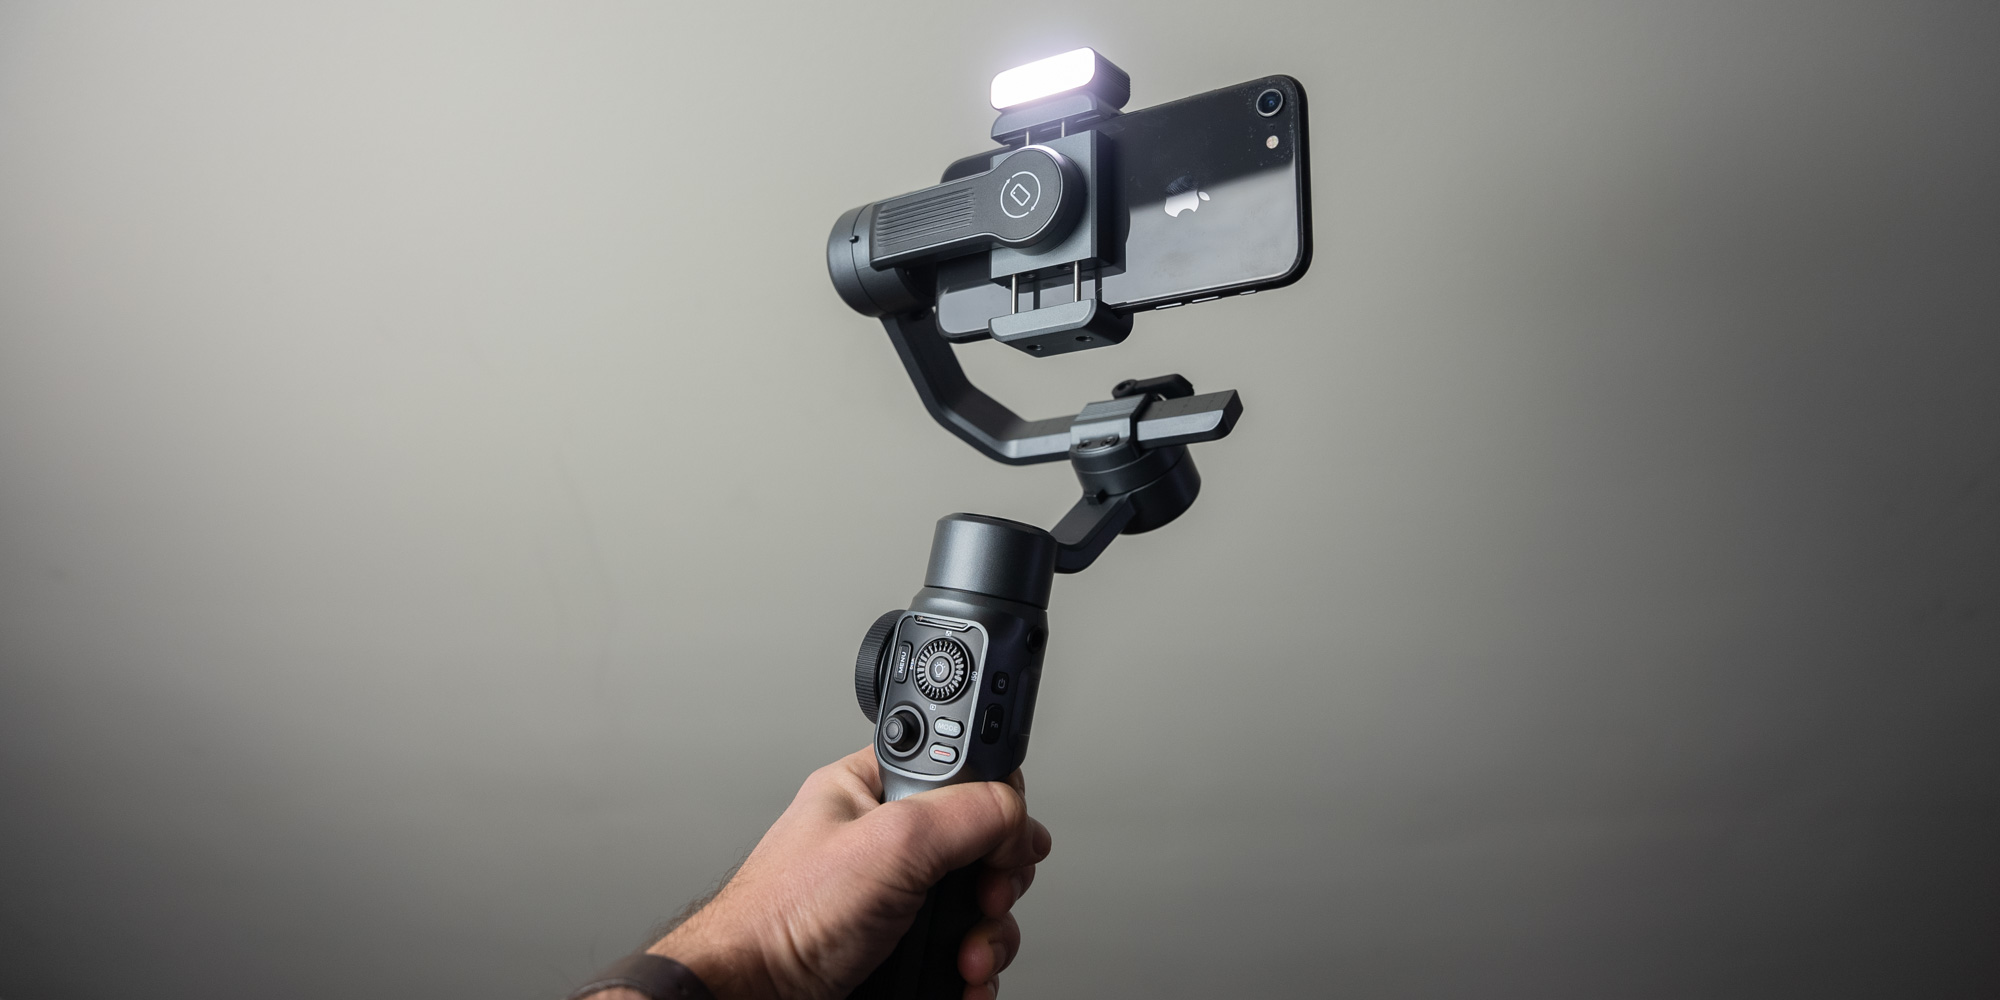 Review: Trying out Zhiyun's top-of-the-line Smooth 5 mobile gimbal